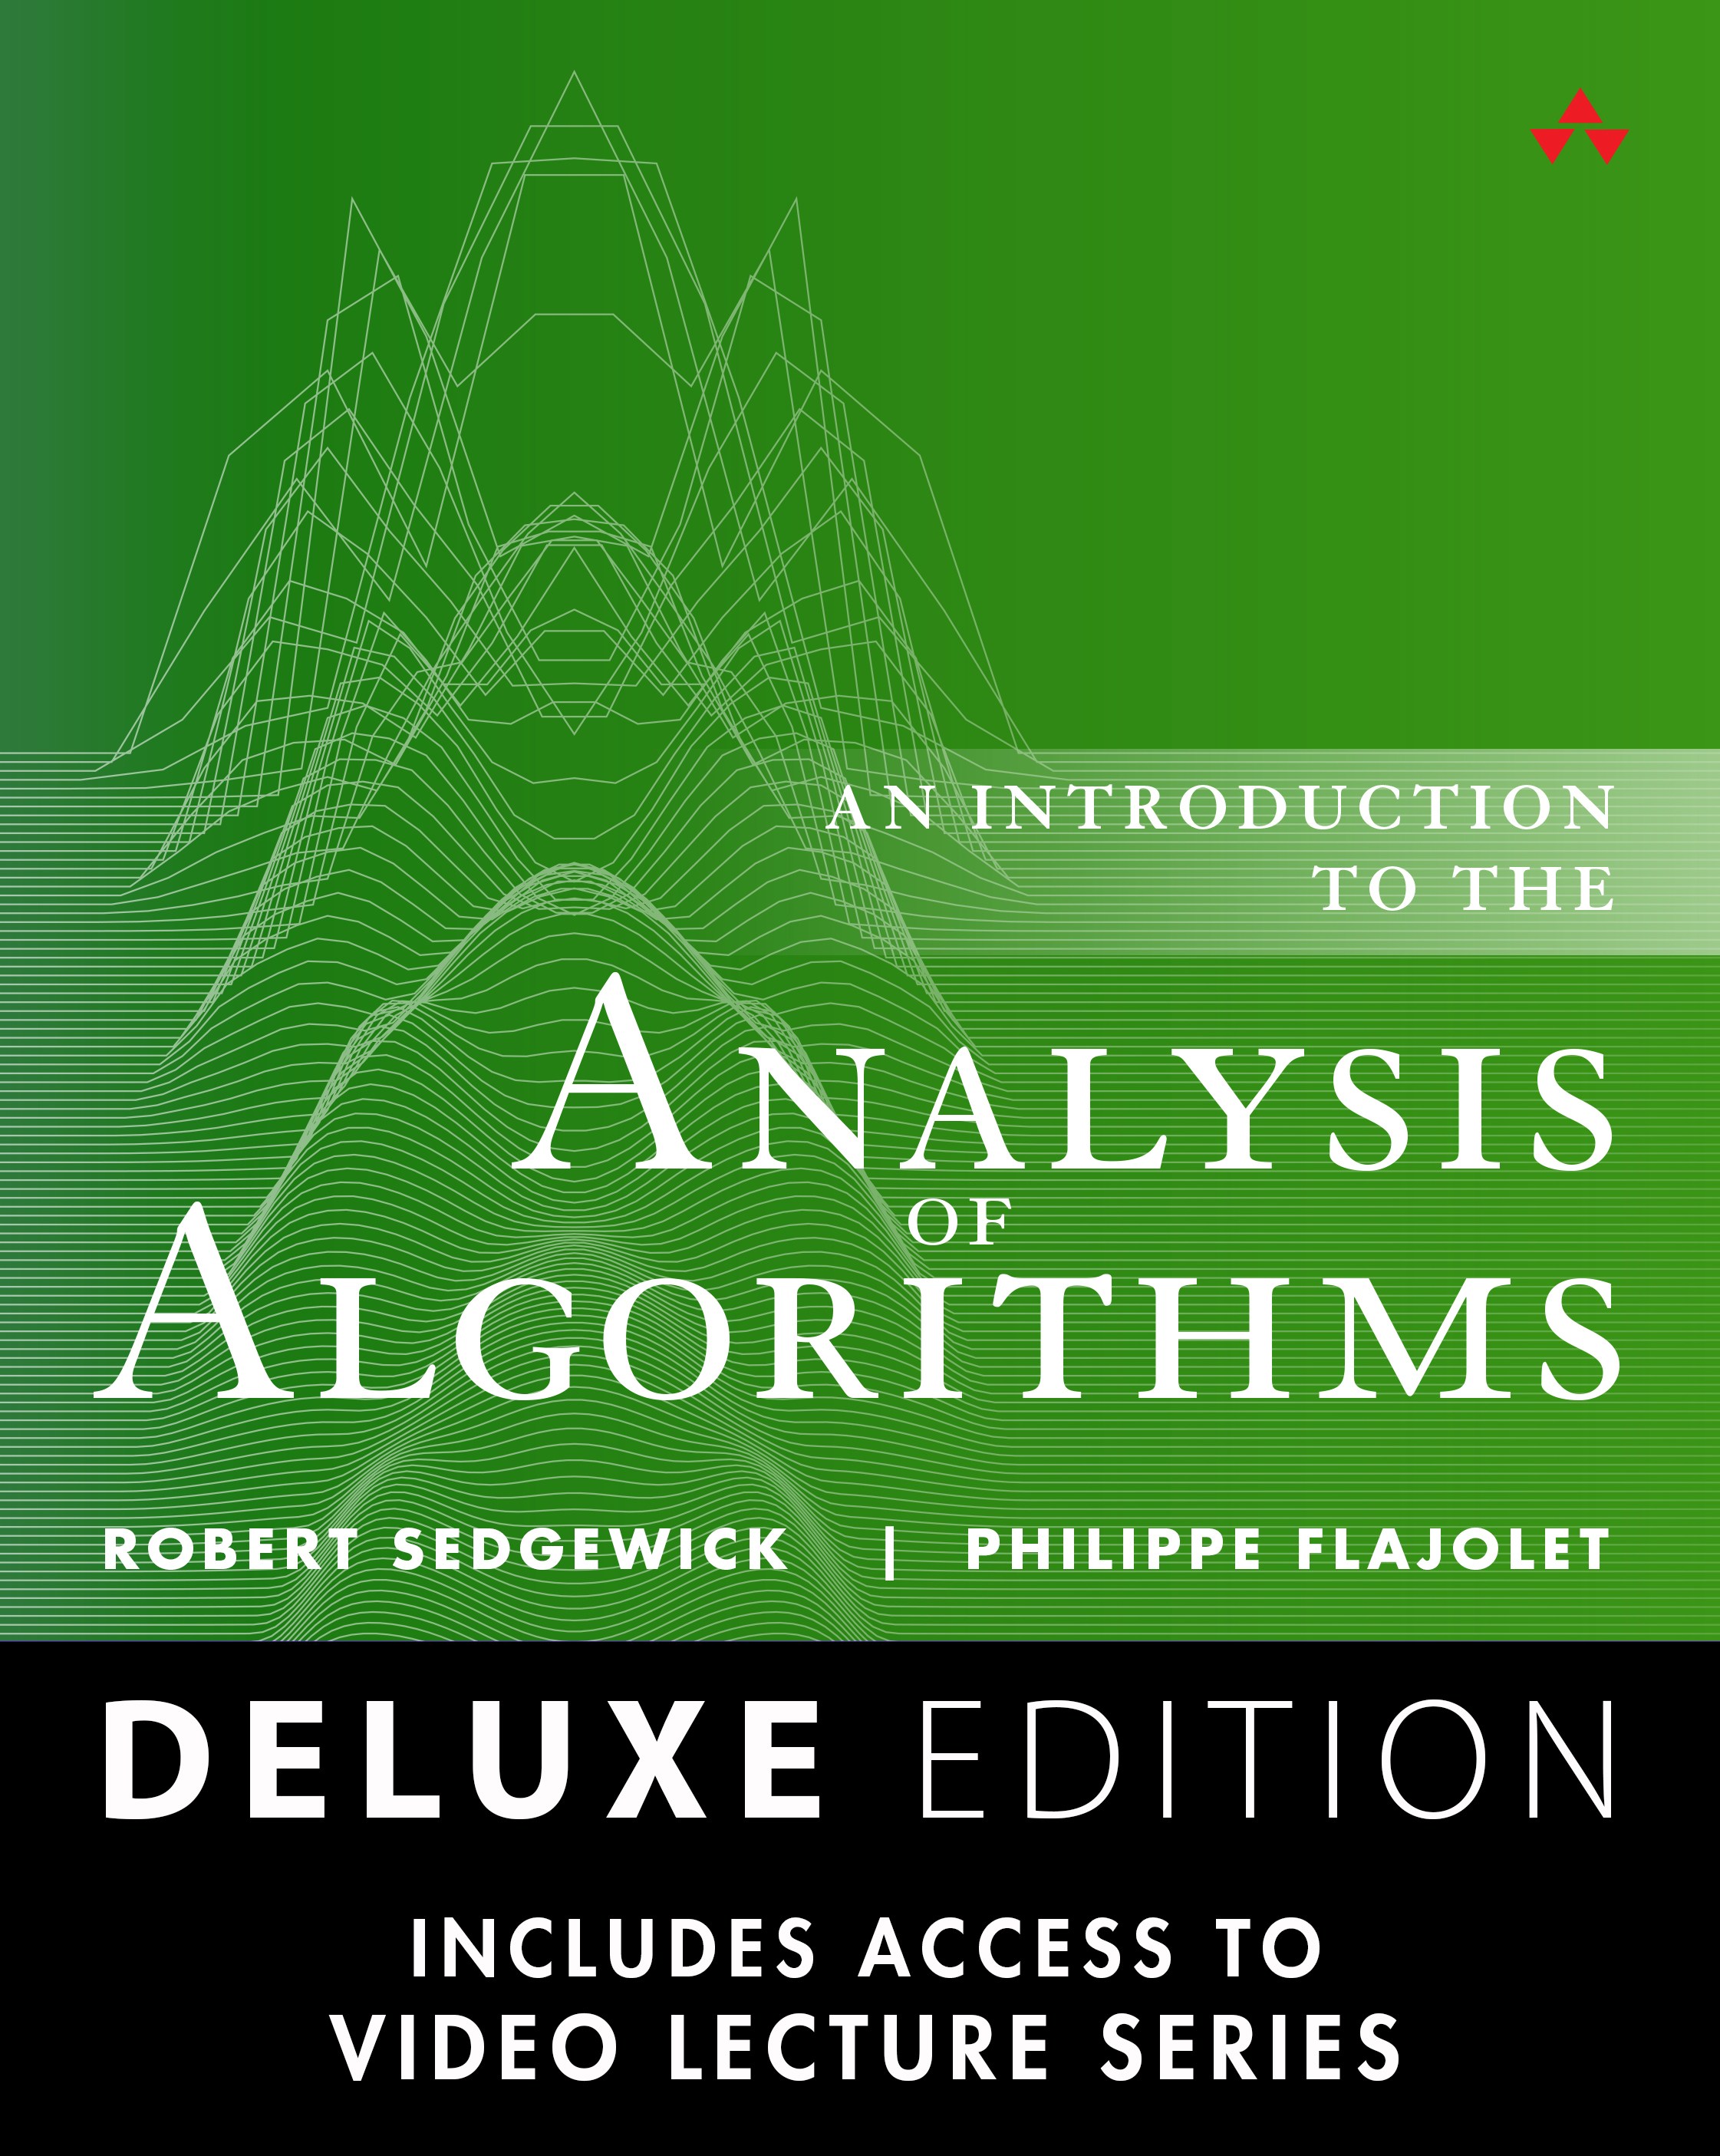 design and analysis of algorithms book pdf free download